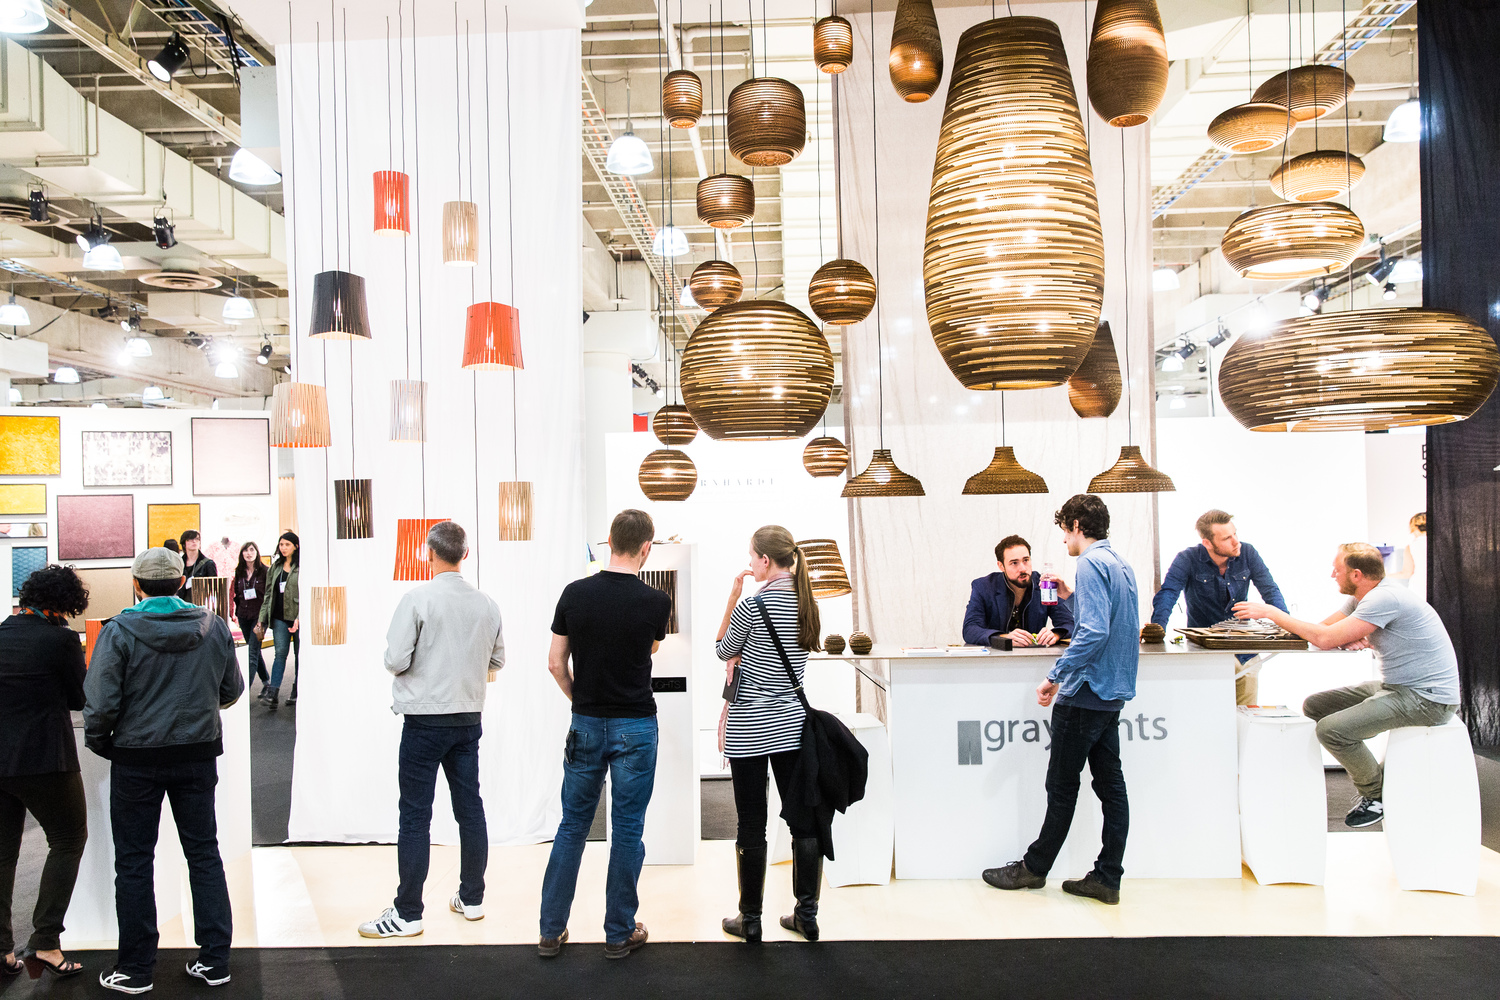 International Contemporary Furniture Fair Is Two Weeks Away and You Have to Be There!